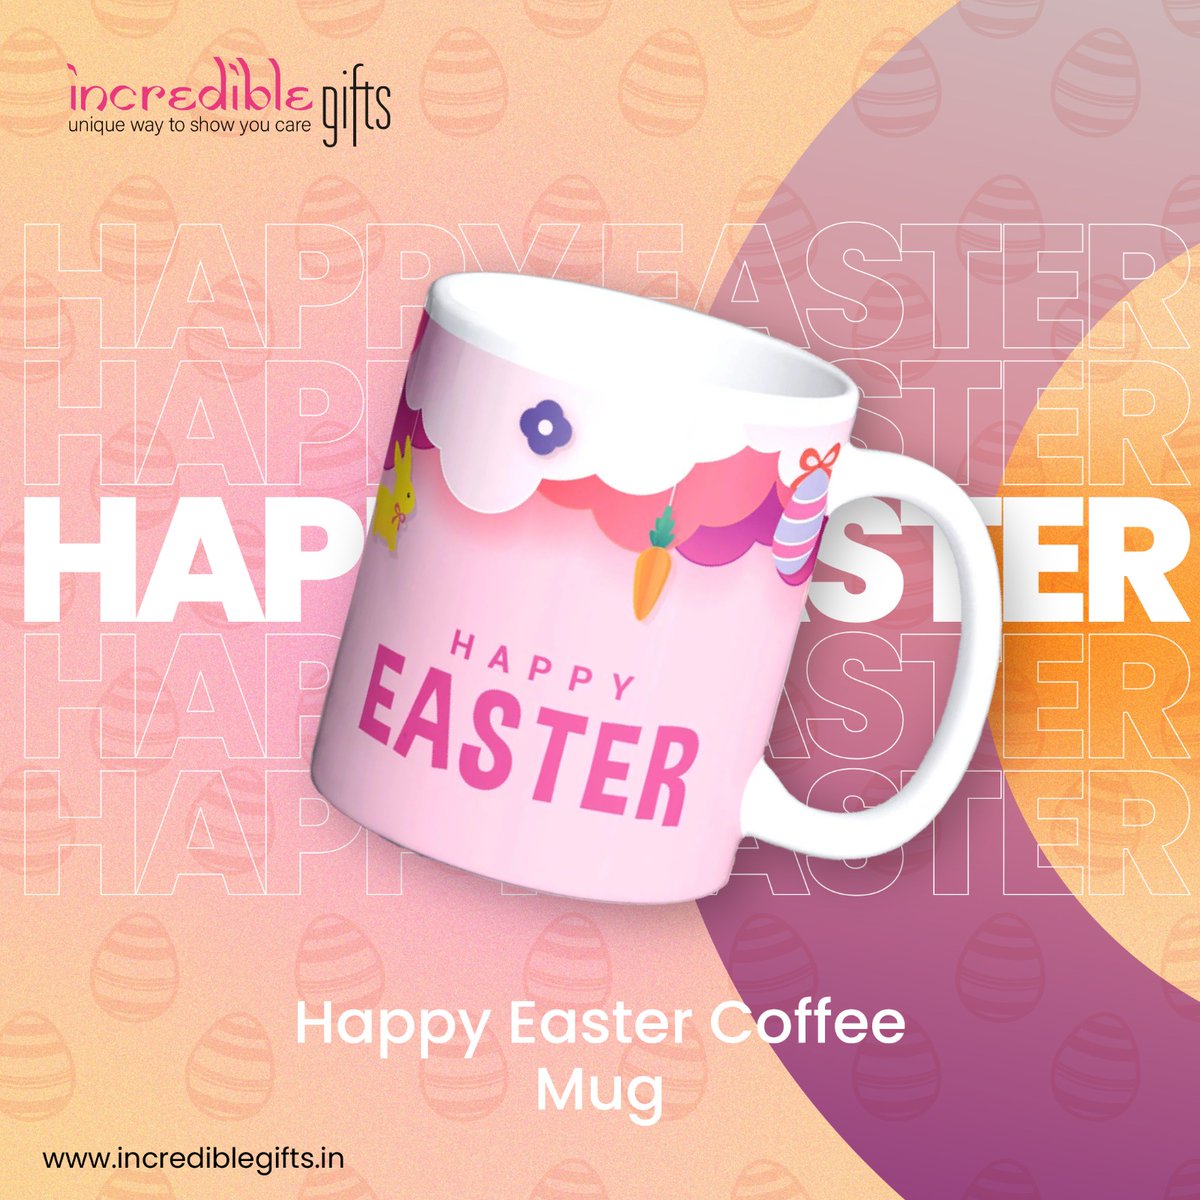 Happy Easter Coffee Mug:
Start your Easter morning off right with our Happy Easter Coffee Mug. Featuring a cheerful Easter design, this ceramic mug is perfect for sipping your favorite hot beverage while enjoying the holiday festivities. #incrediblegifts☕